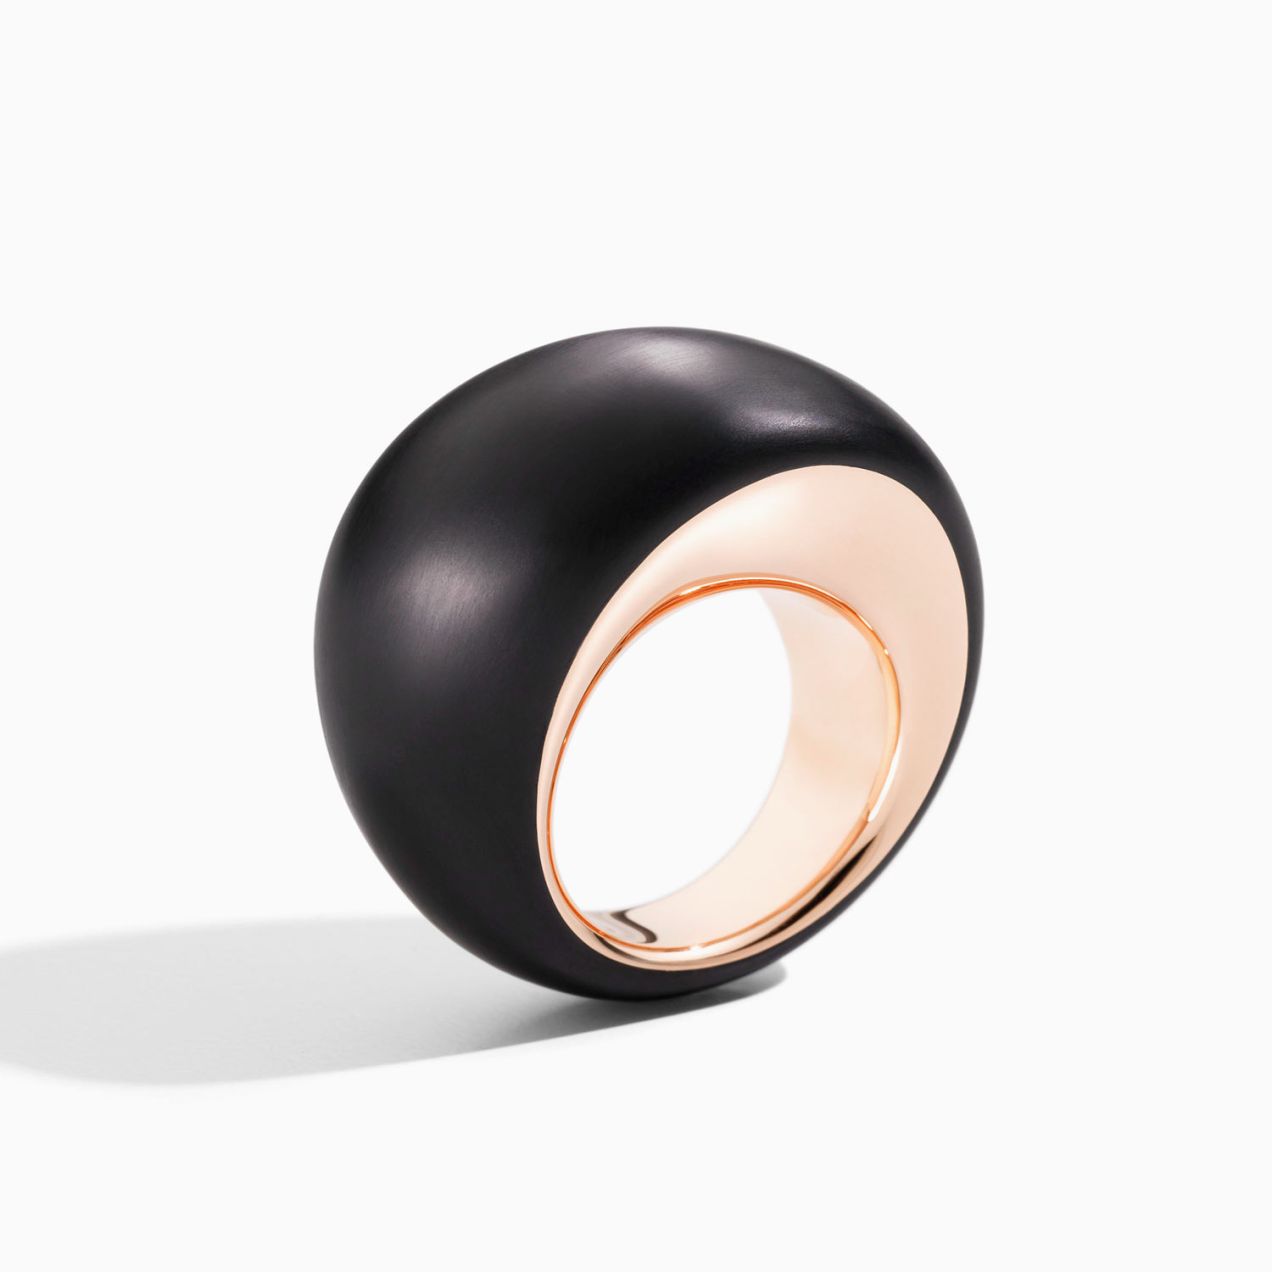 Vhernier pirouette ring in rose gold with jet